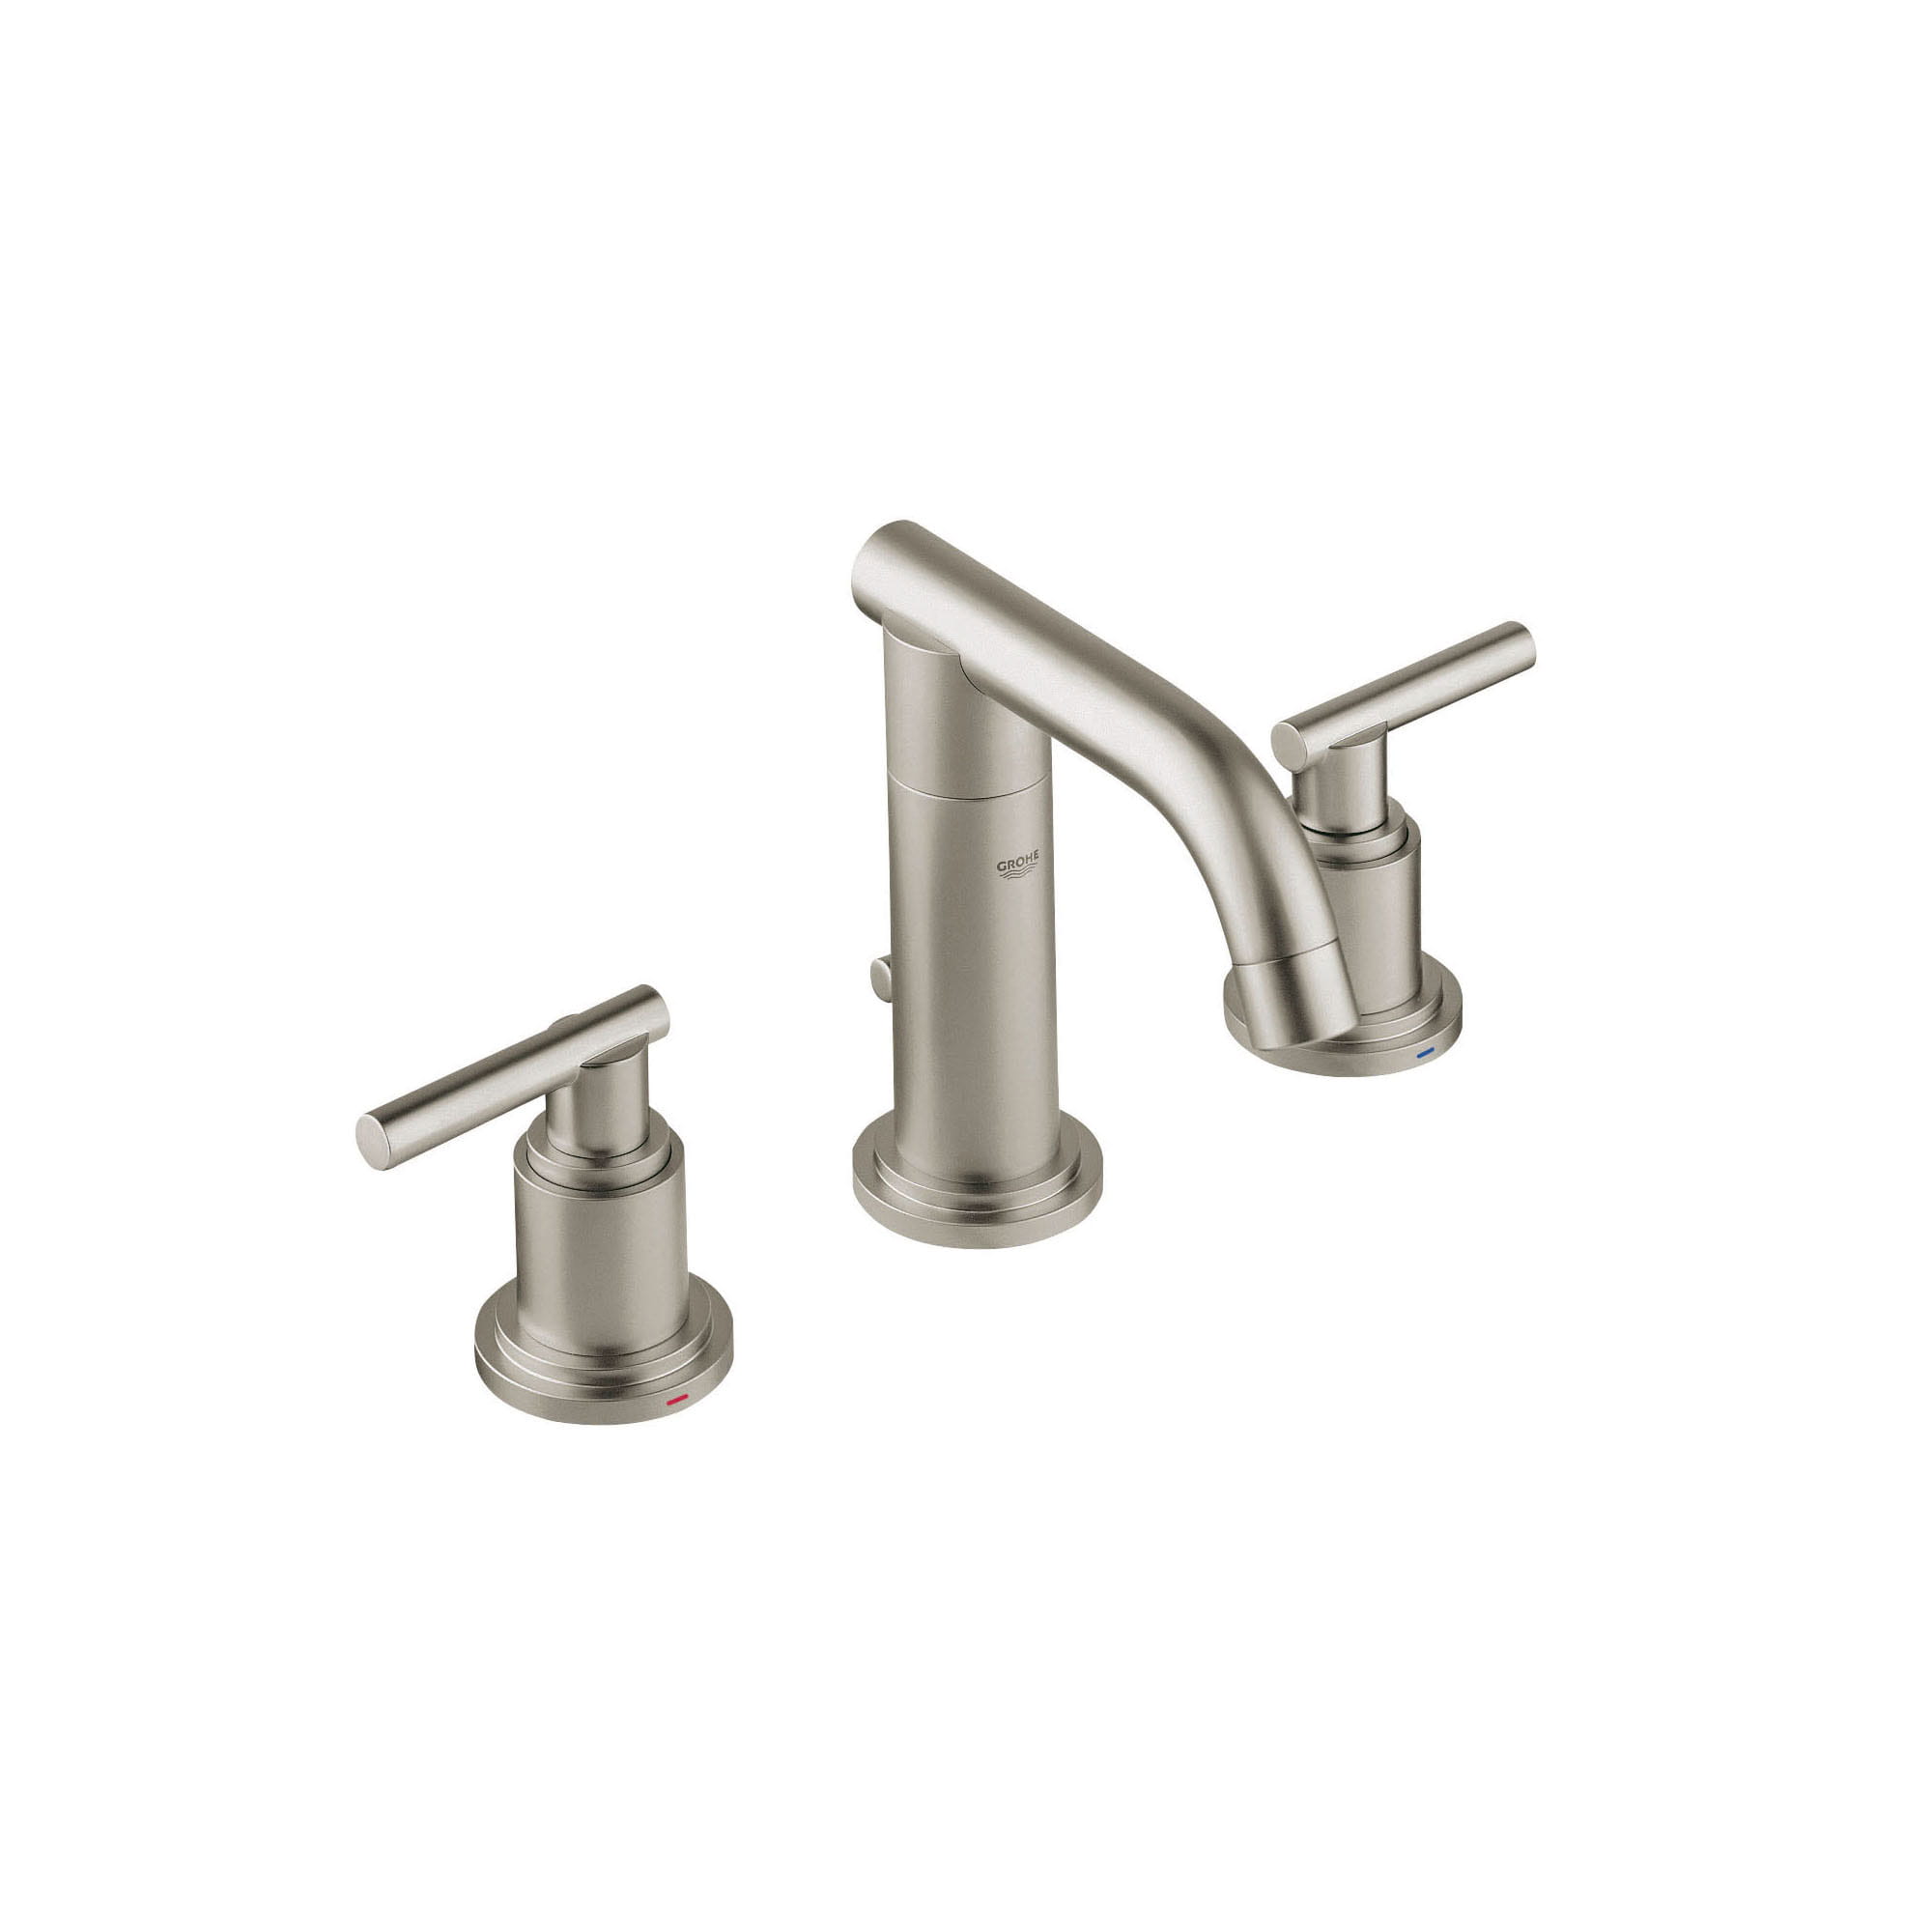 Lavatory Wideset With O Hdls Low Sp GROHE BRUSHED NICKEL